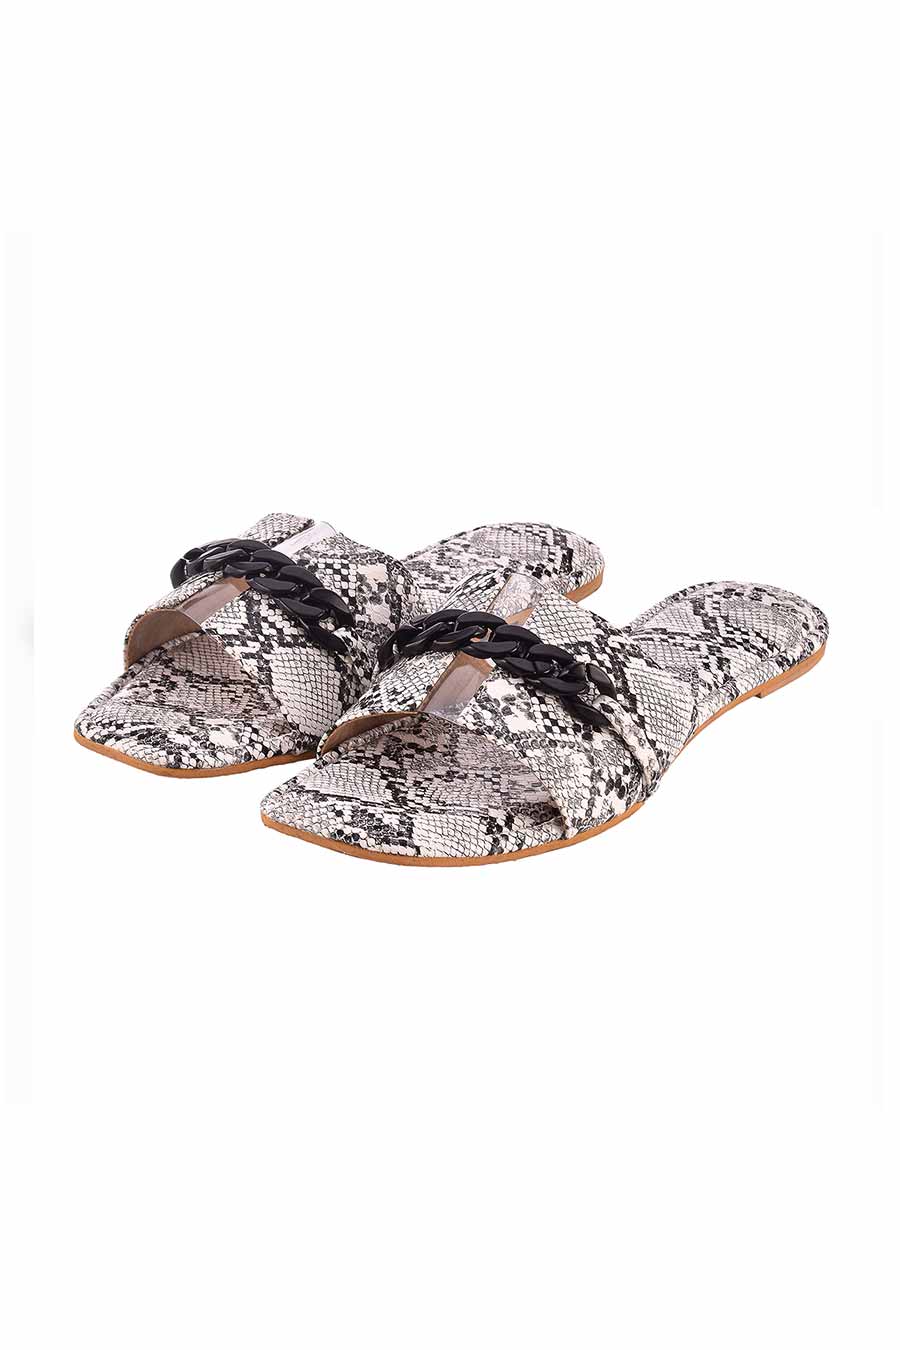 The Daily Edit Snake Skin Chain Flats